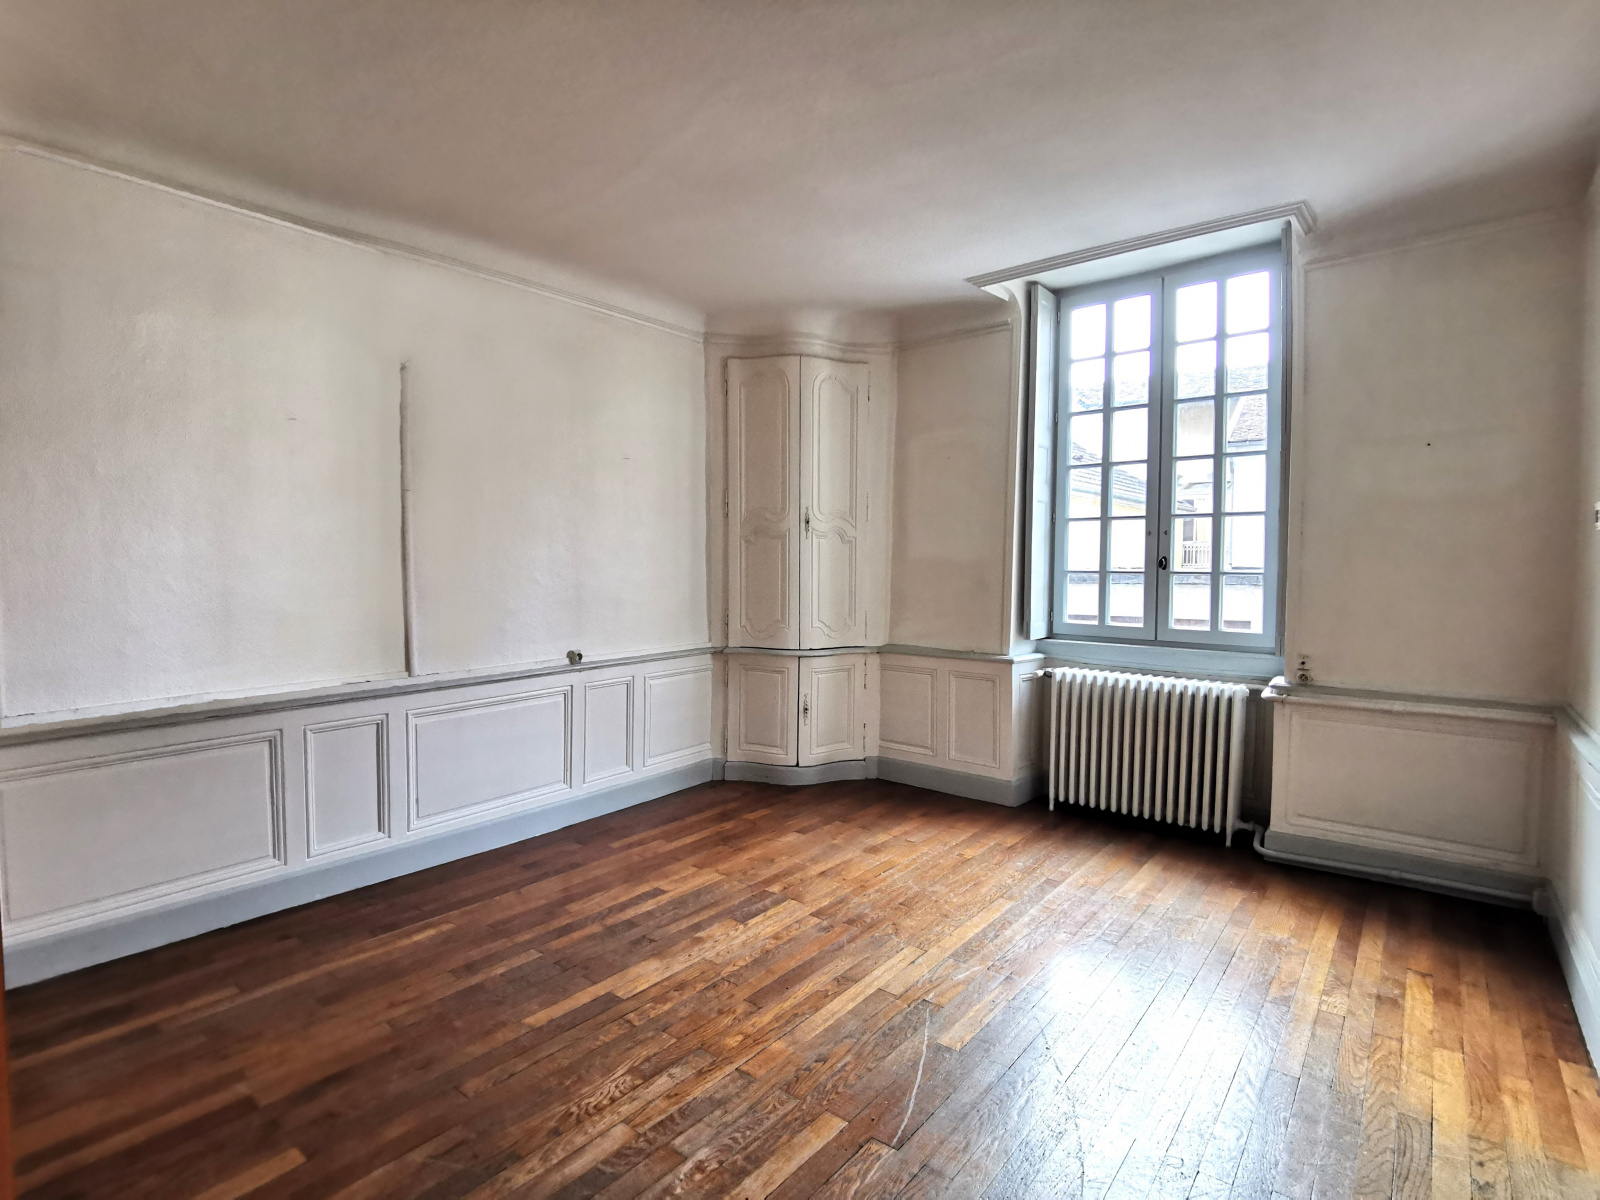 Image_7, Appartement, Belley,
                                ref :A0003447